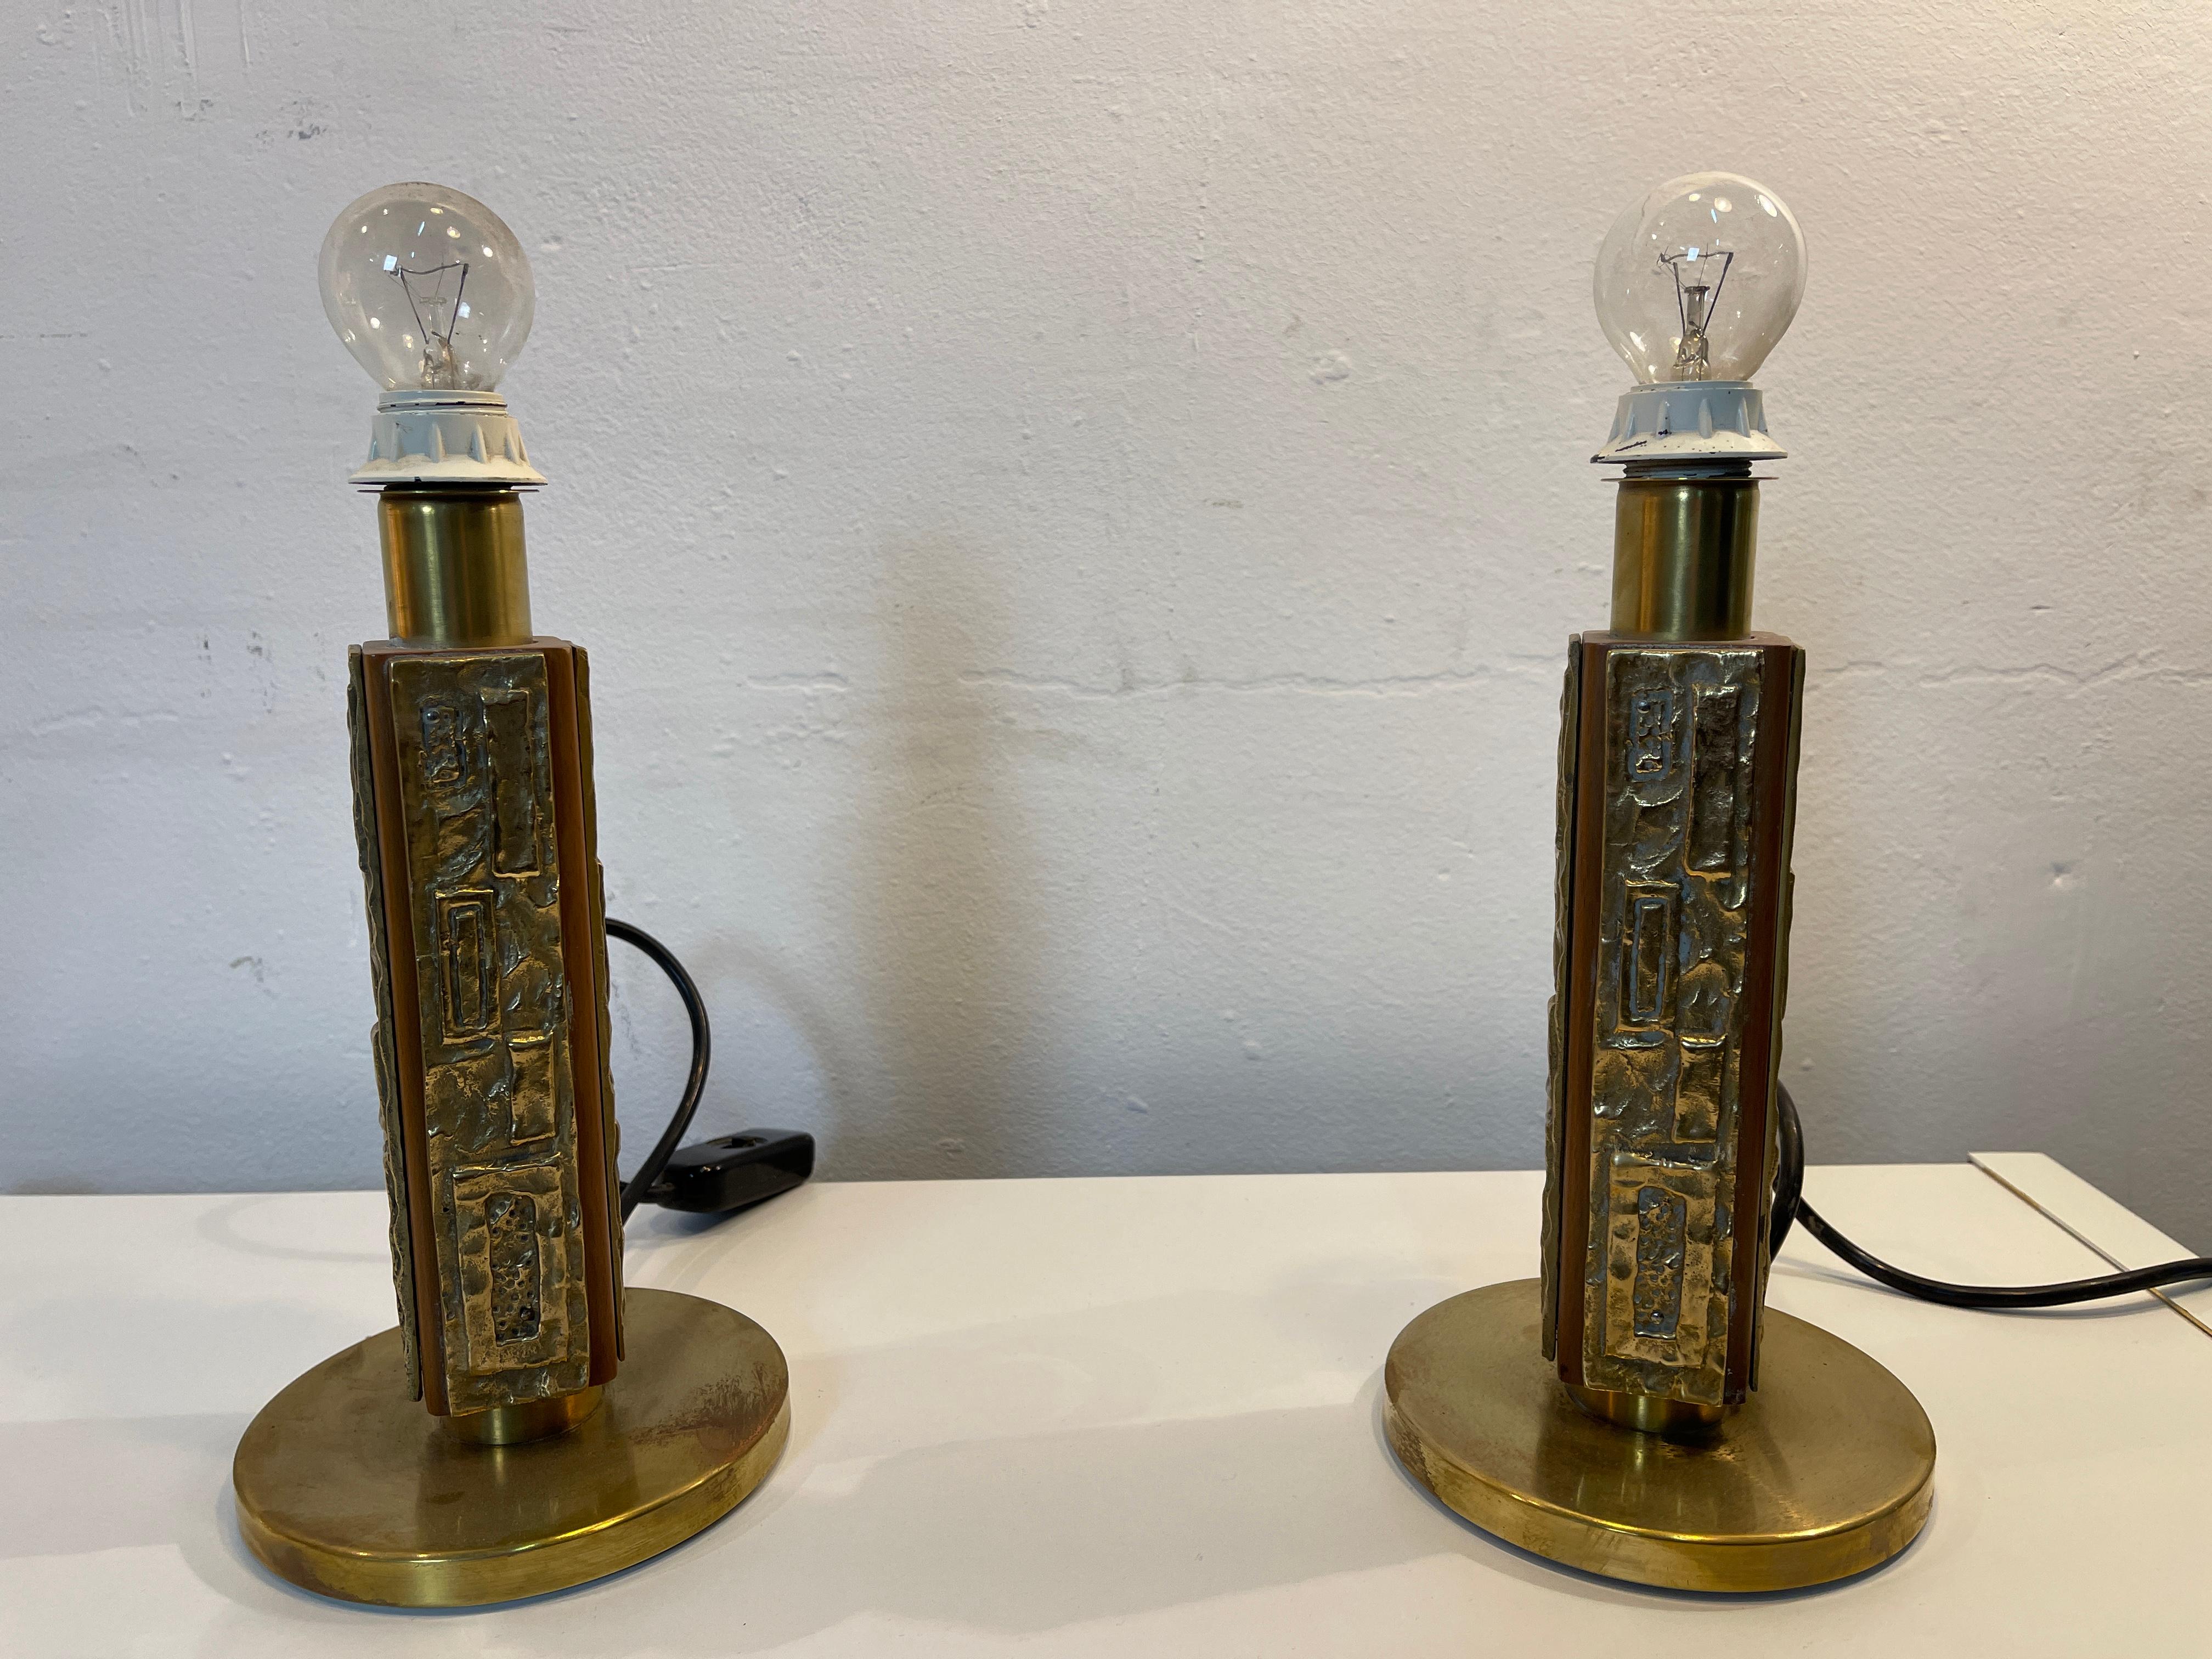 Pair of Angelo Brotto Lamps Mod, Margot 1